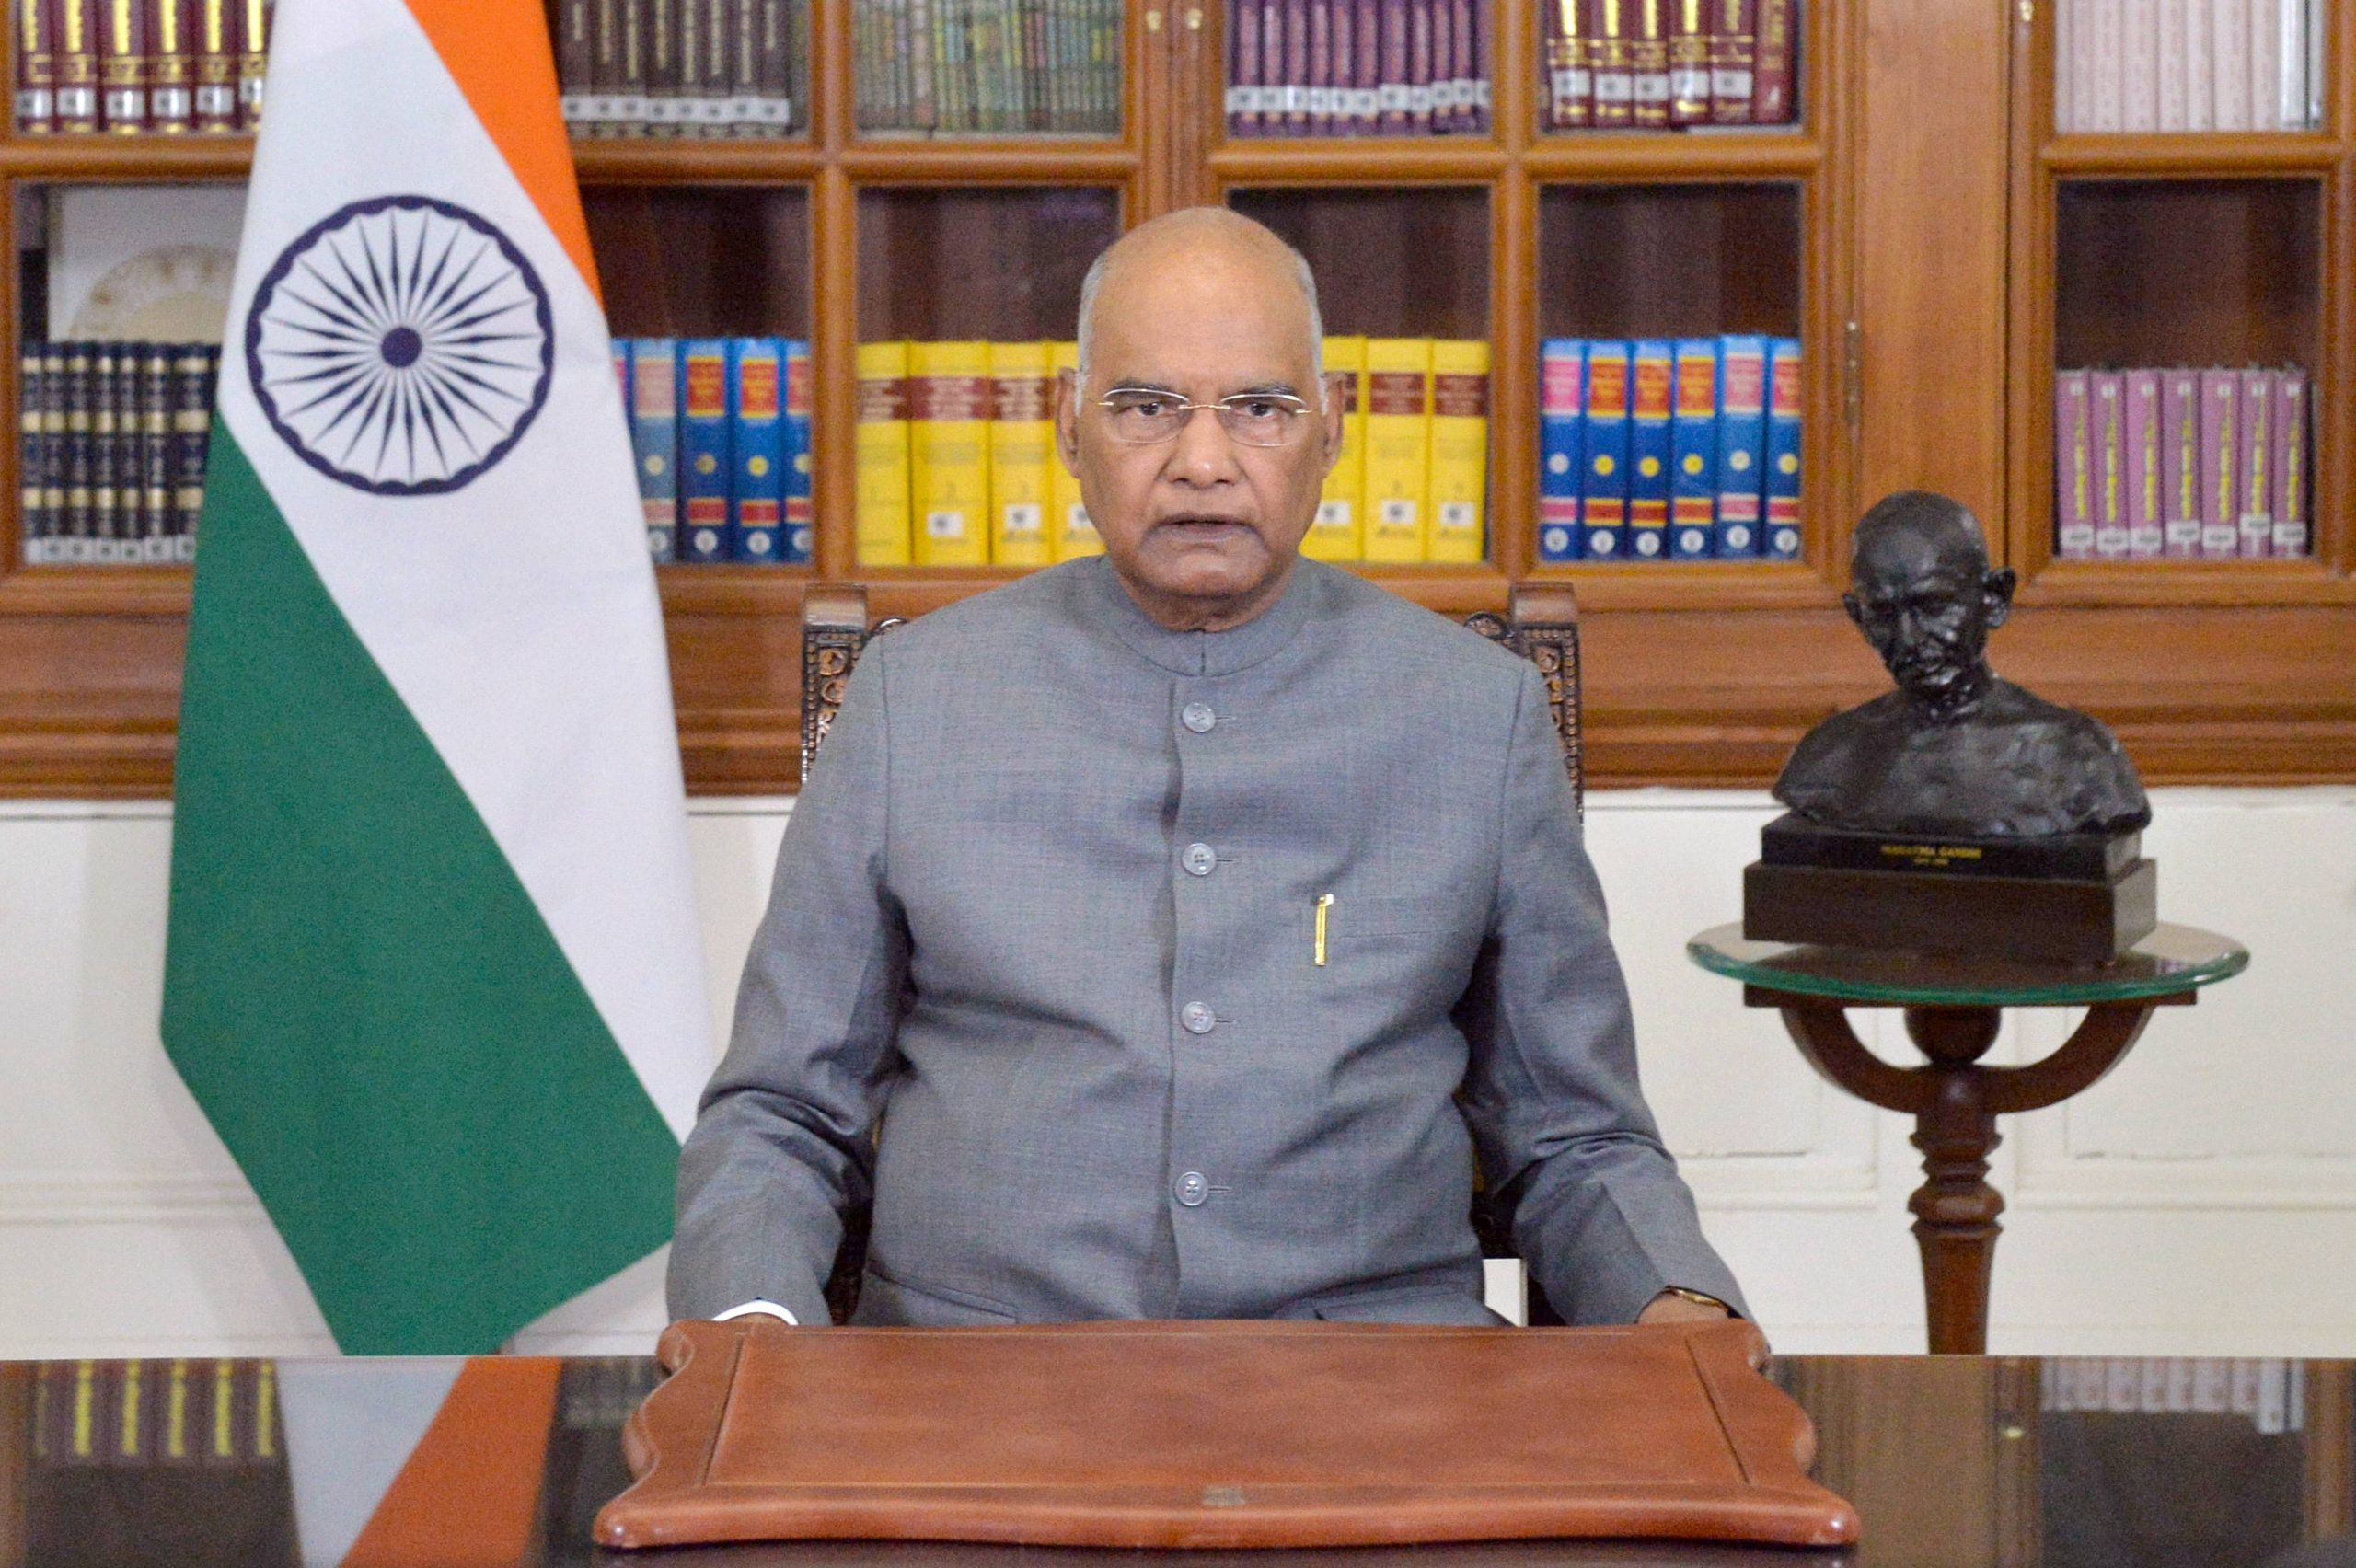 President Kovind’s address highlights: ‘This is an important year for India’